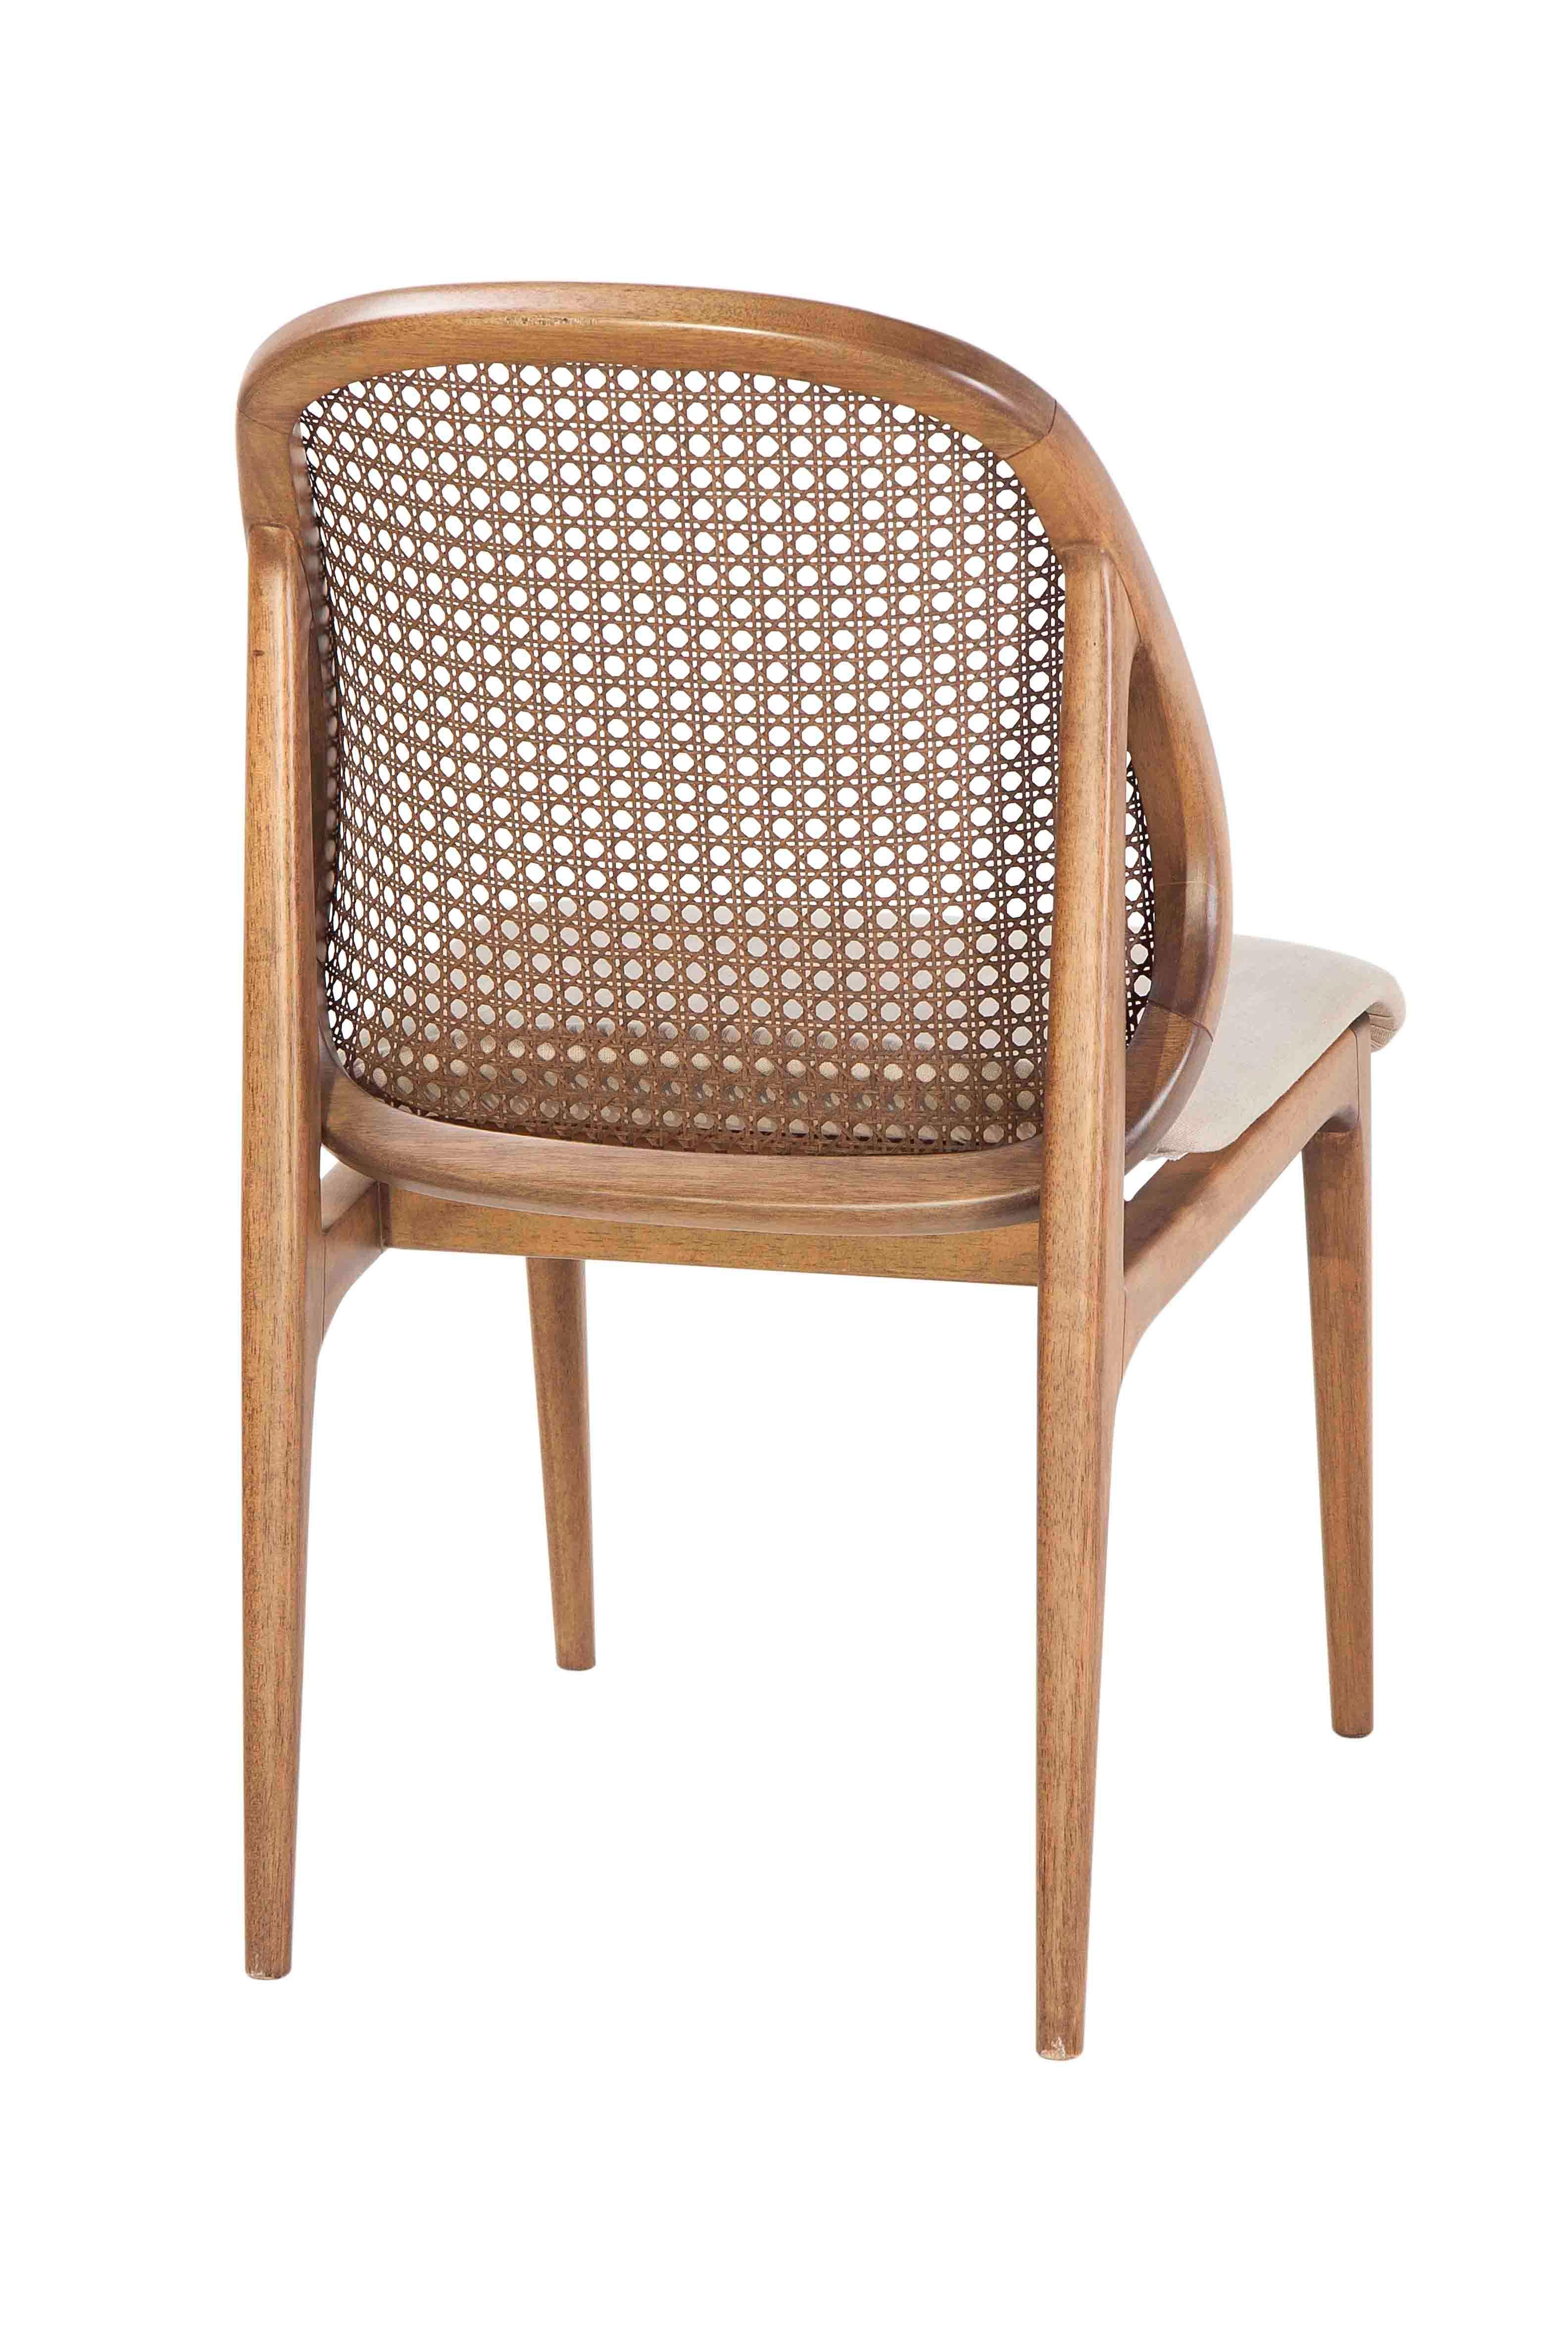 Material: wood, fabric, and straw

Seat Fabric color: offwhite
Backrest Straw color: honey.